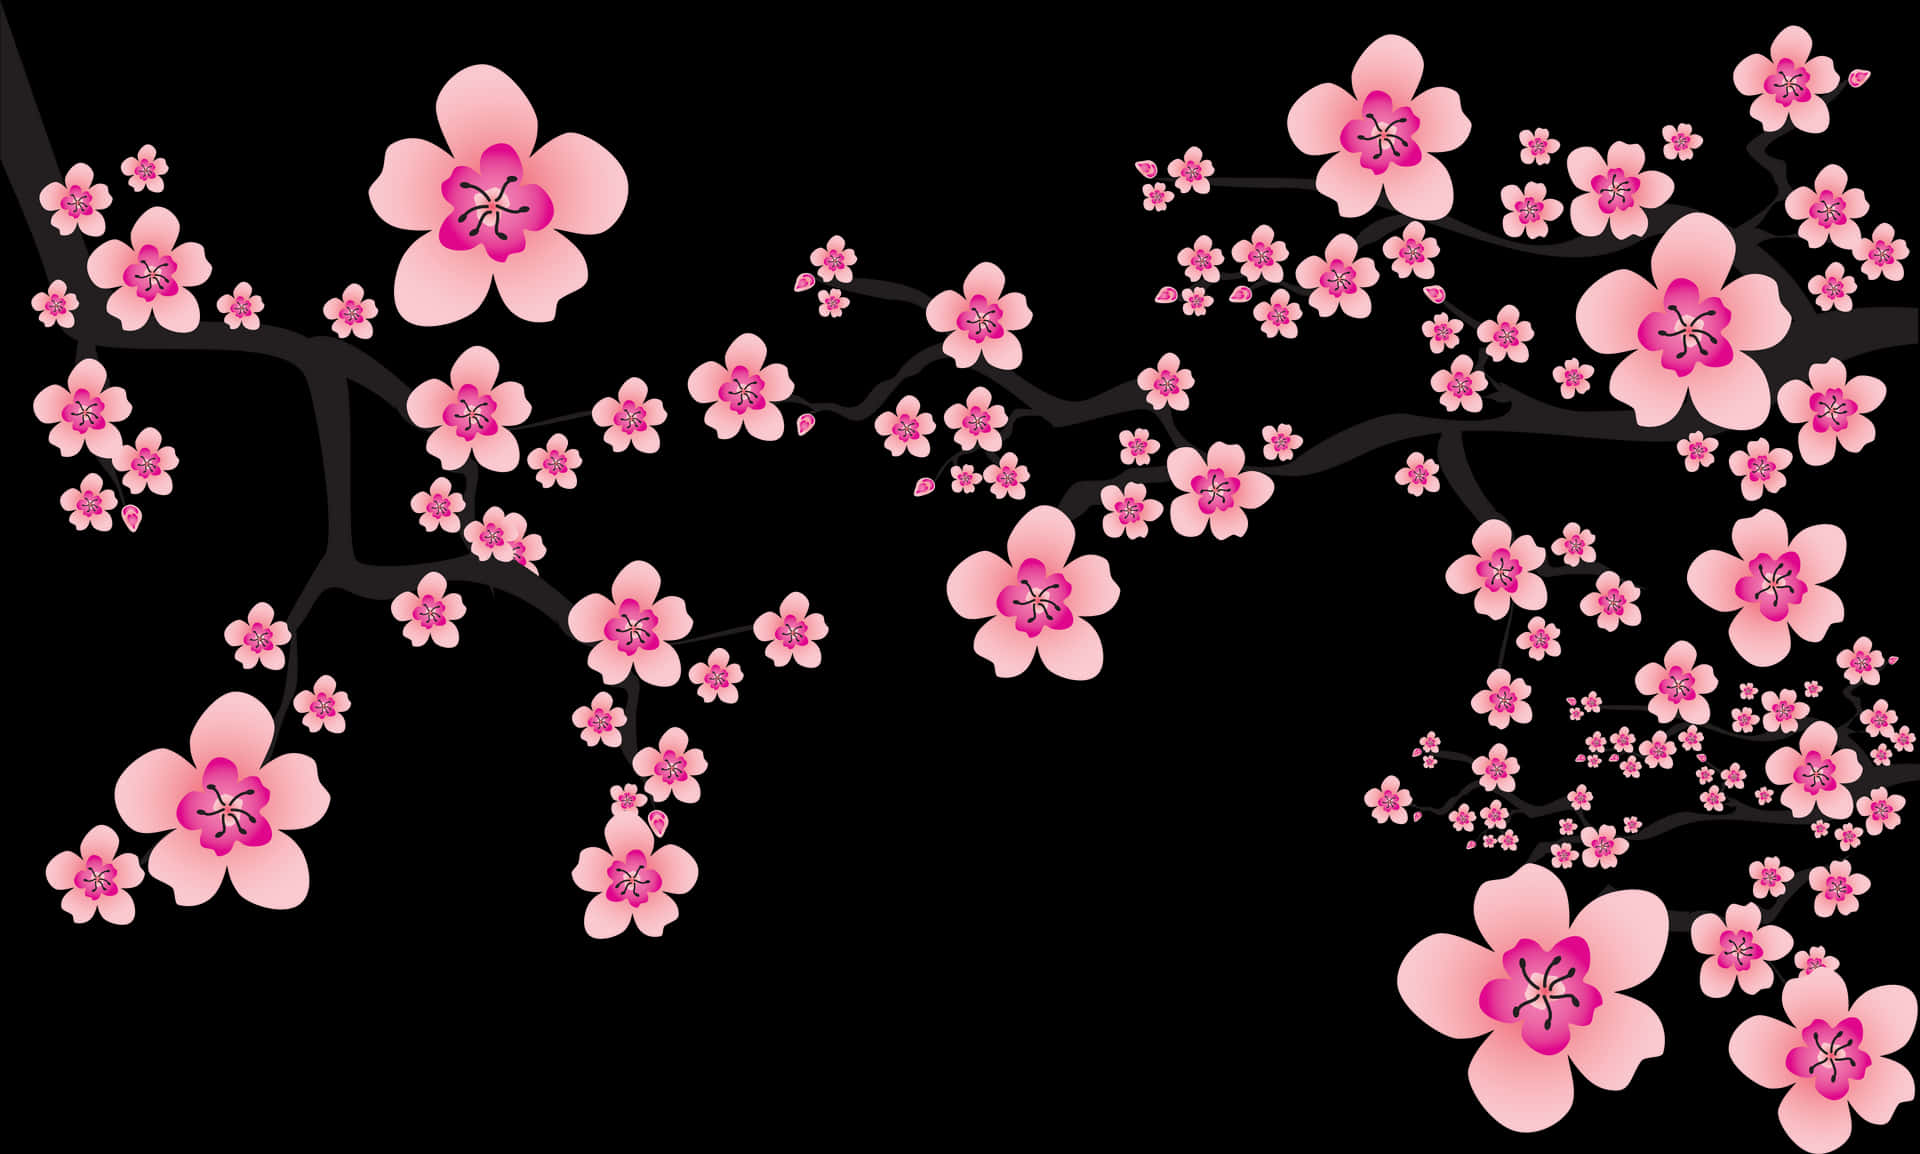 Abstract Cherry Blossomson Black Background PNG